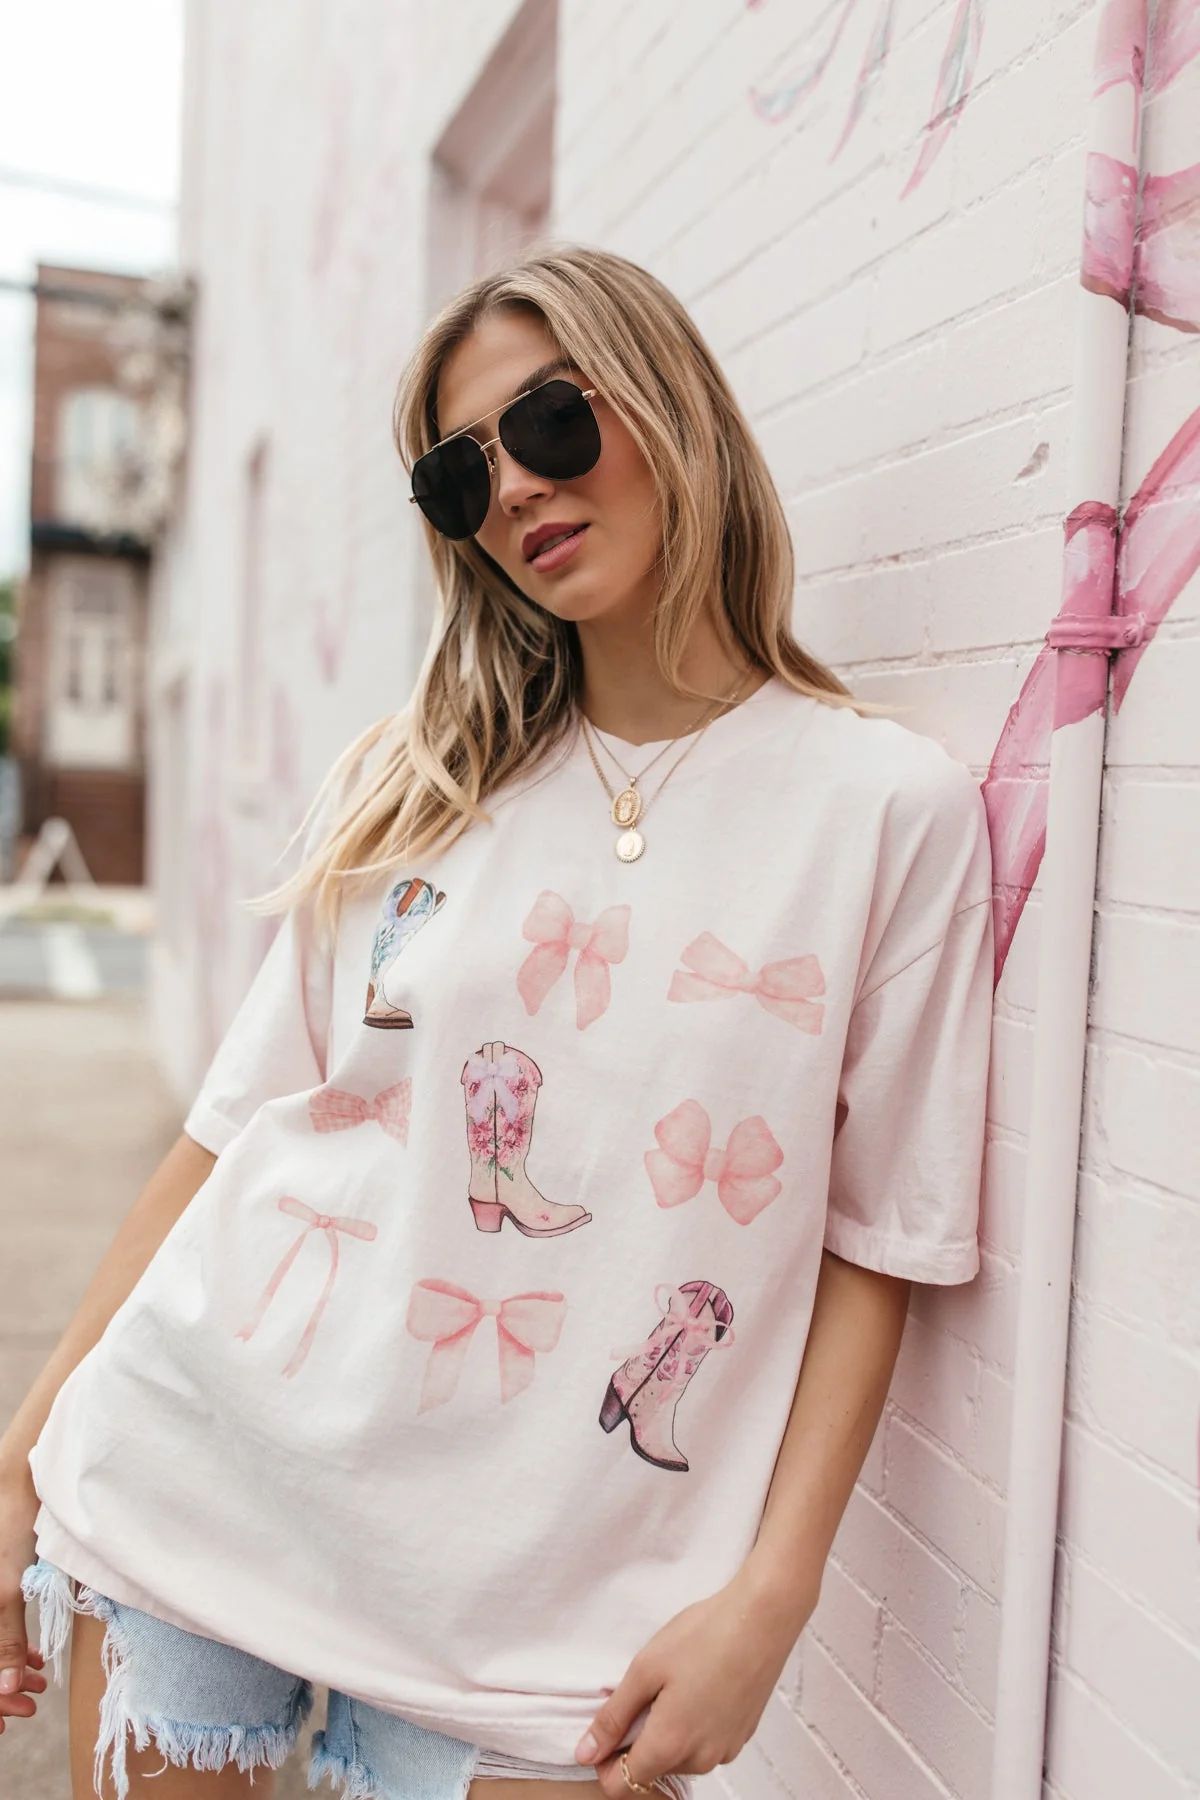 Boots & Bows Tee | The Post